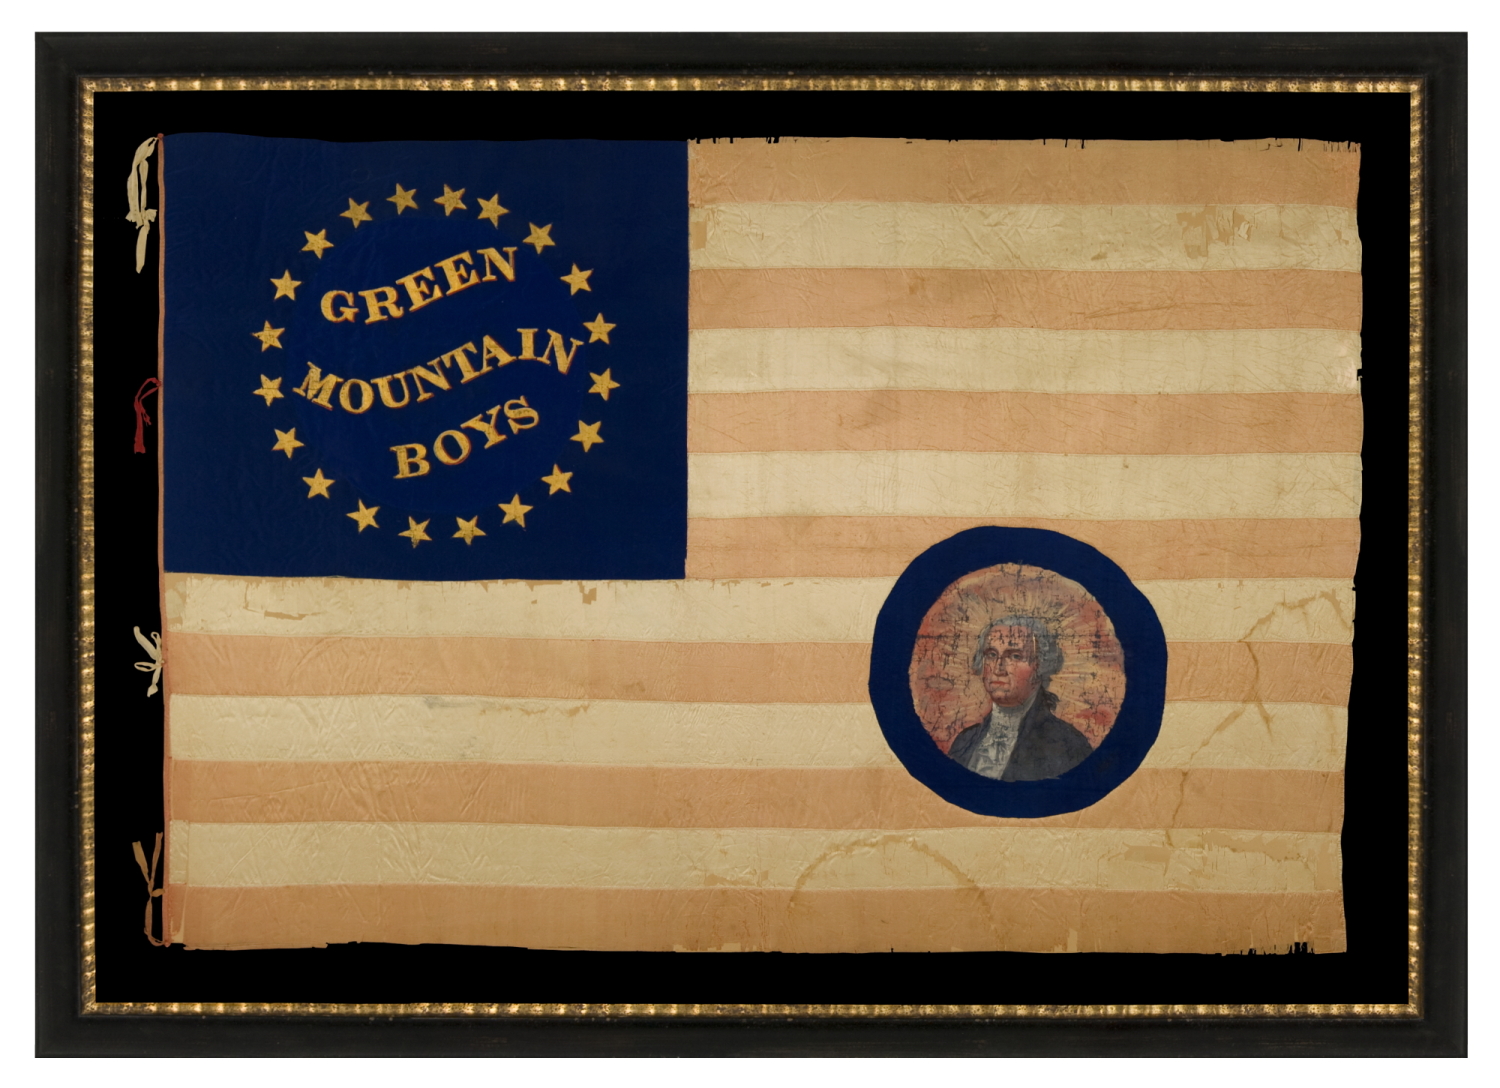 SILK, CIVIL WAR BATTLE FLAG WITH "GREEN MOUNTAIN BOYS" GILT-PAINTED IN WHIMSICAL SERPENTINE TEXT, INSIDE A RING OF 20 STARS THAT EXCLUDES THE SOUTHERN STATES, WITH A FEDERAL EAGLE ON THE REVERSE; DISPLAYED POST-WAR, AT WHICH TIME A PAINTED PORTRAIT OF GEORGE WASHINGTON WAS APPLIED OVER THE UNIT NICKNAME, LIKELY IN 1877, WHEN A GIANT CELEBRATION WAS HELD TO COMMEMORATE THE 100-YEAR ANNIVERSARY OF THE BATTLE OF BENNINGTON (VERMONT), AND HONOR A VISIT OF PRESIDENT RUTHERFORD B. HAYES